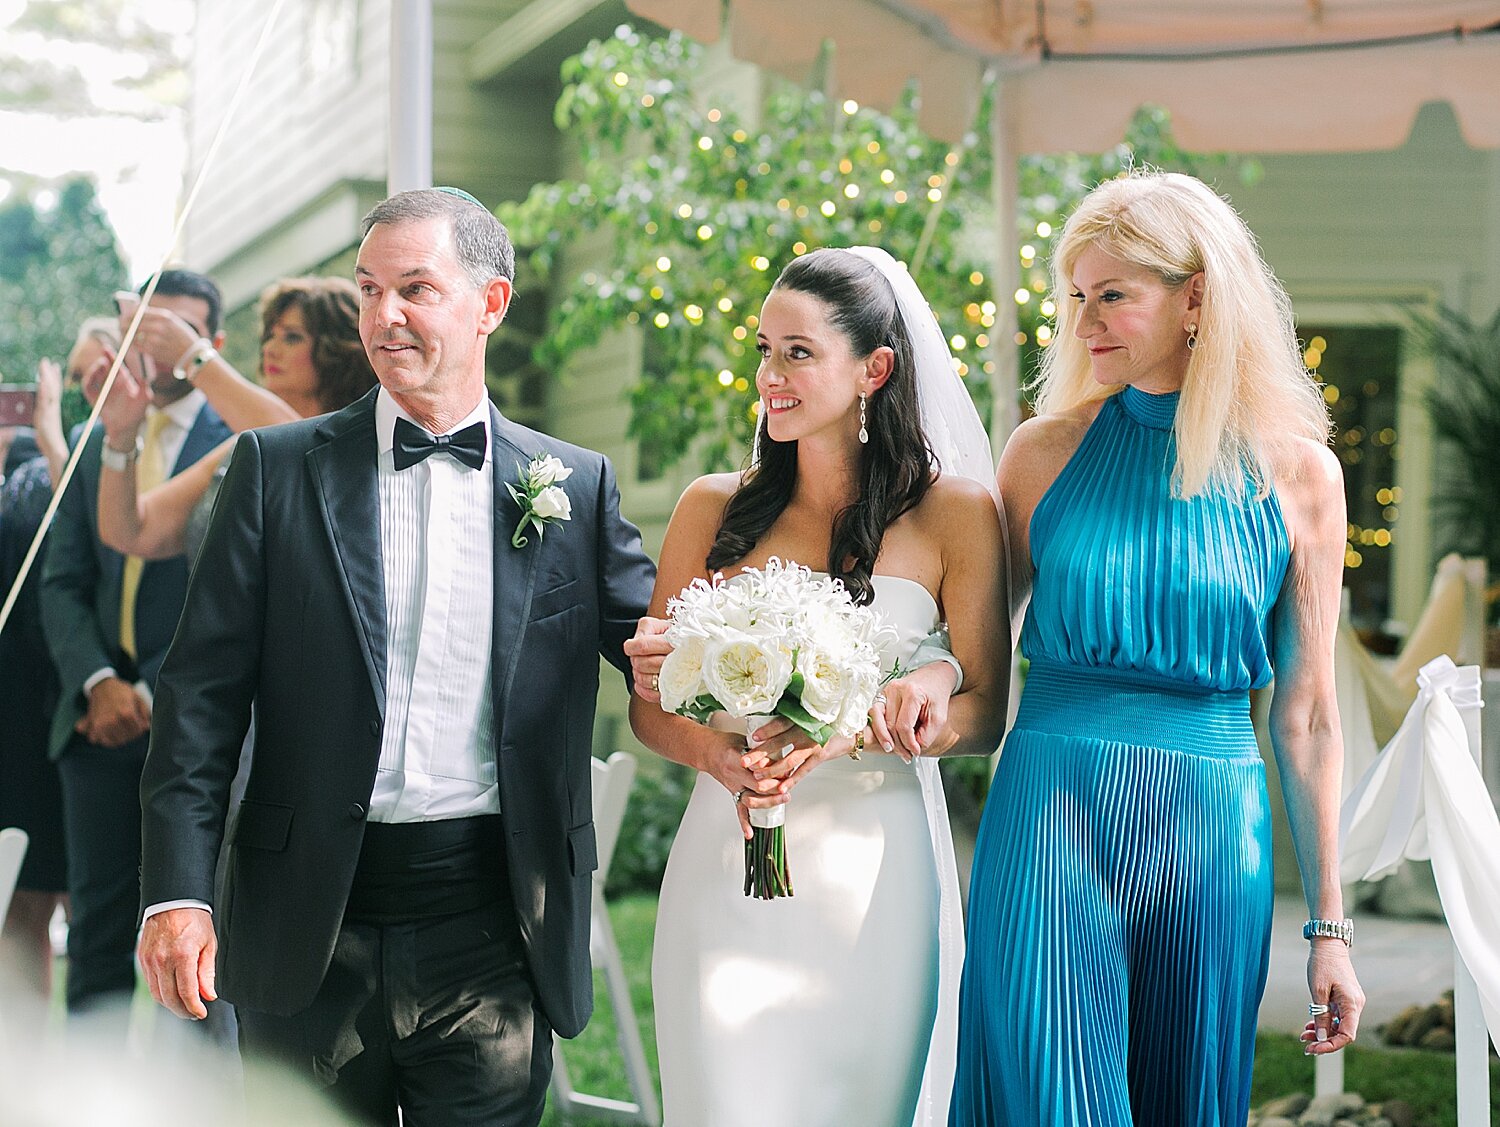 bride walks down aisle with parents during Jewish wedding ceremony | Stylish Private Home Wedding Inspiration | Asher Gardner Photography